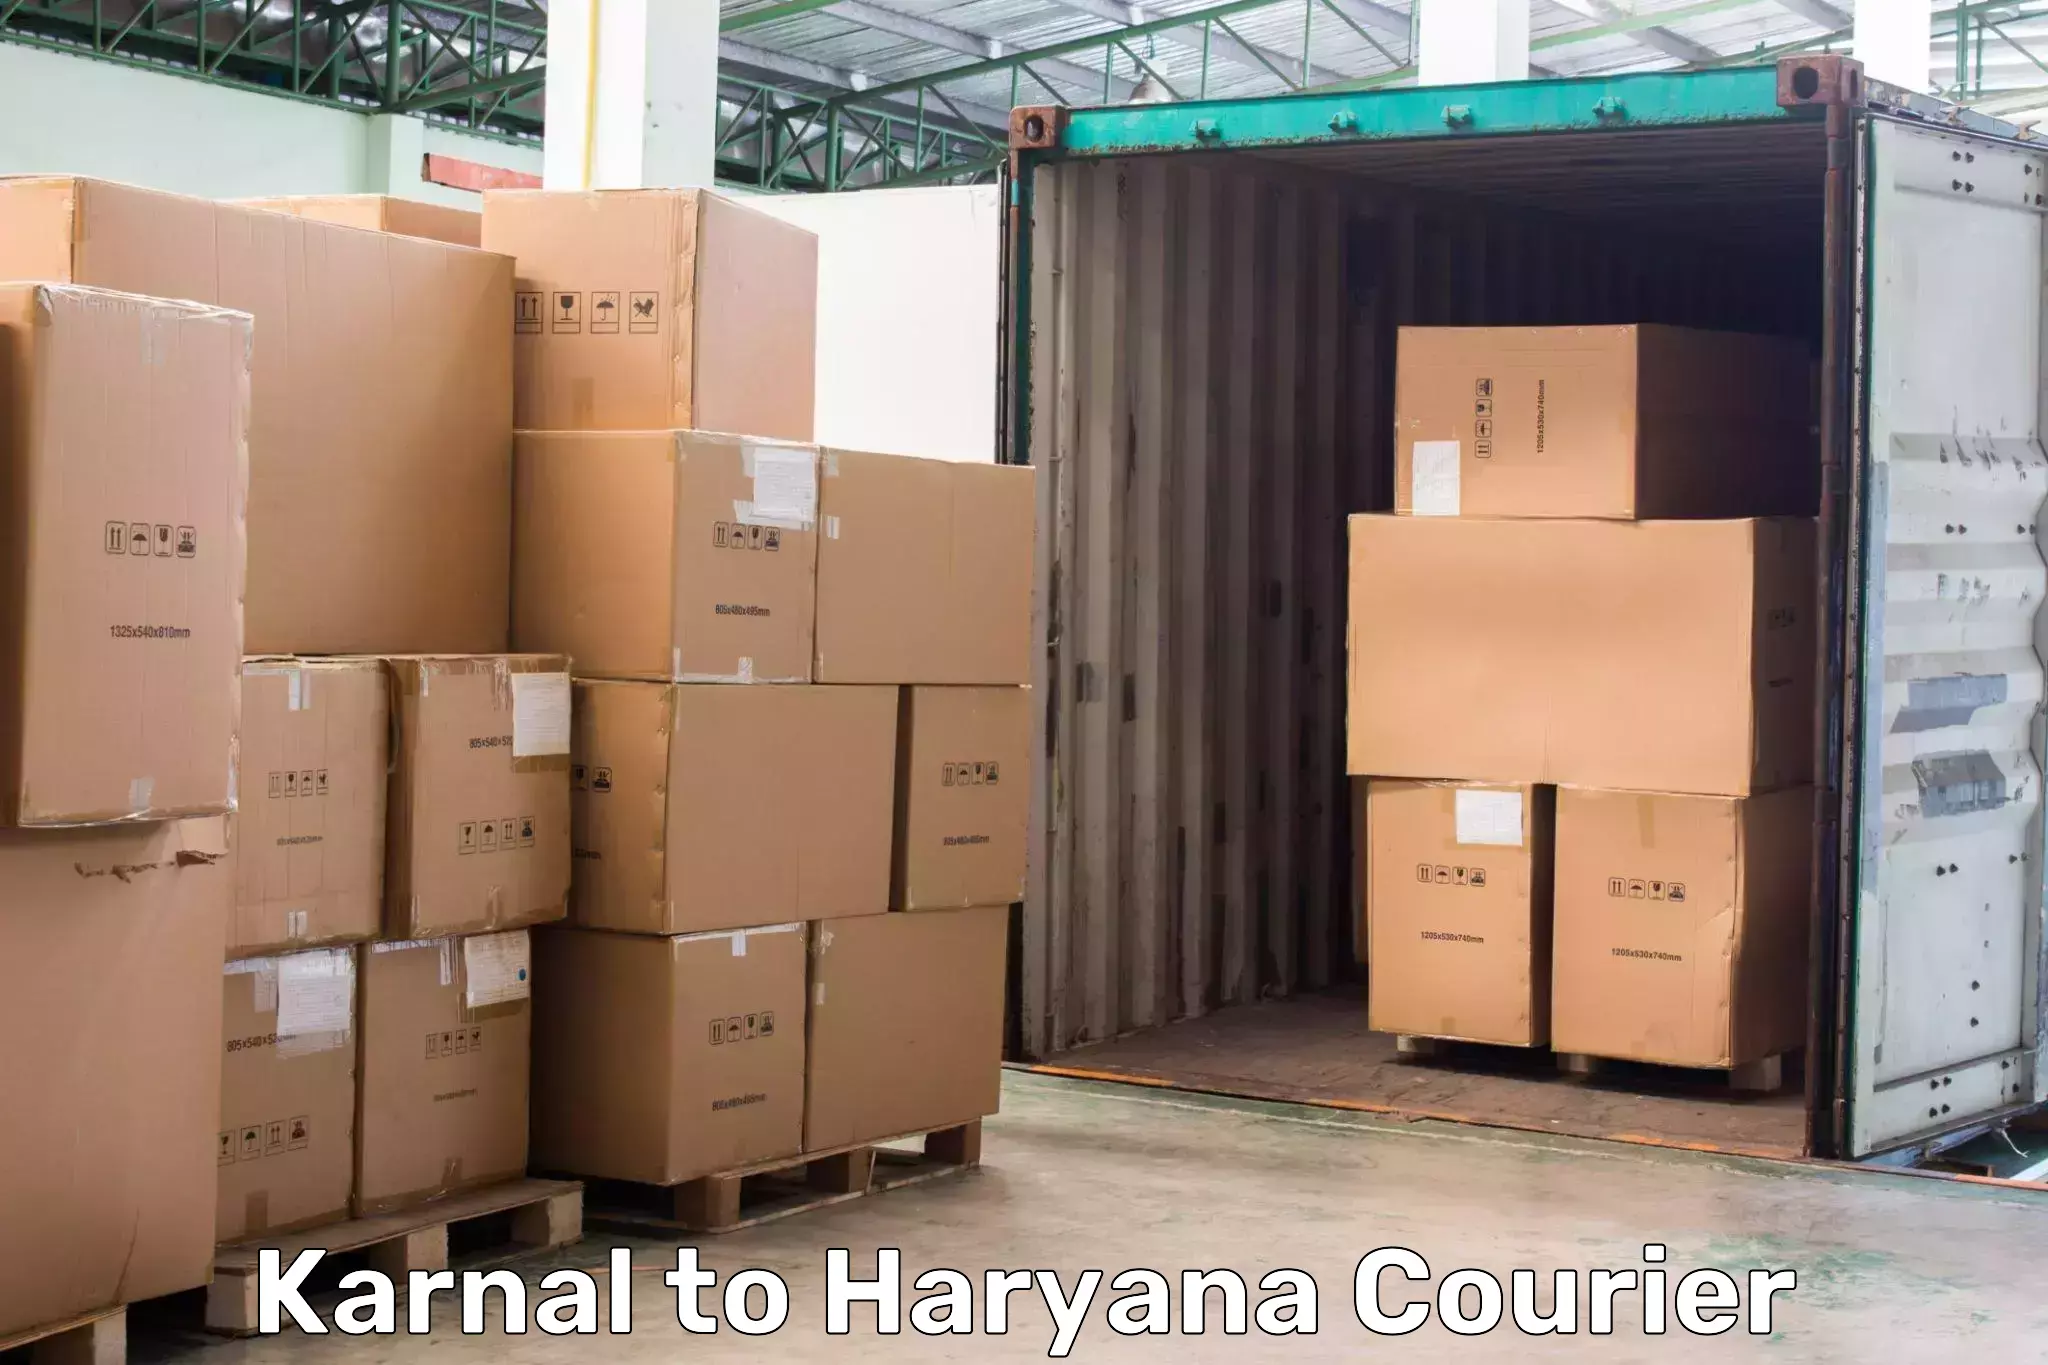 International courier networks Karnal to Meham